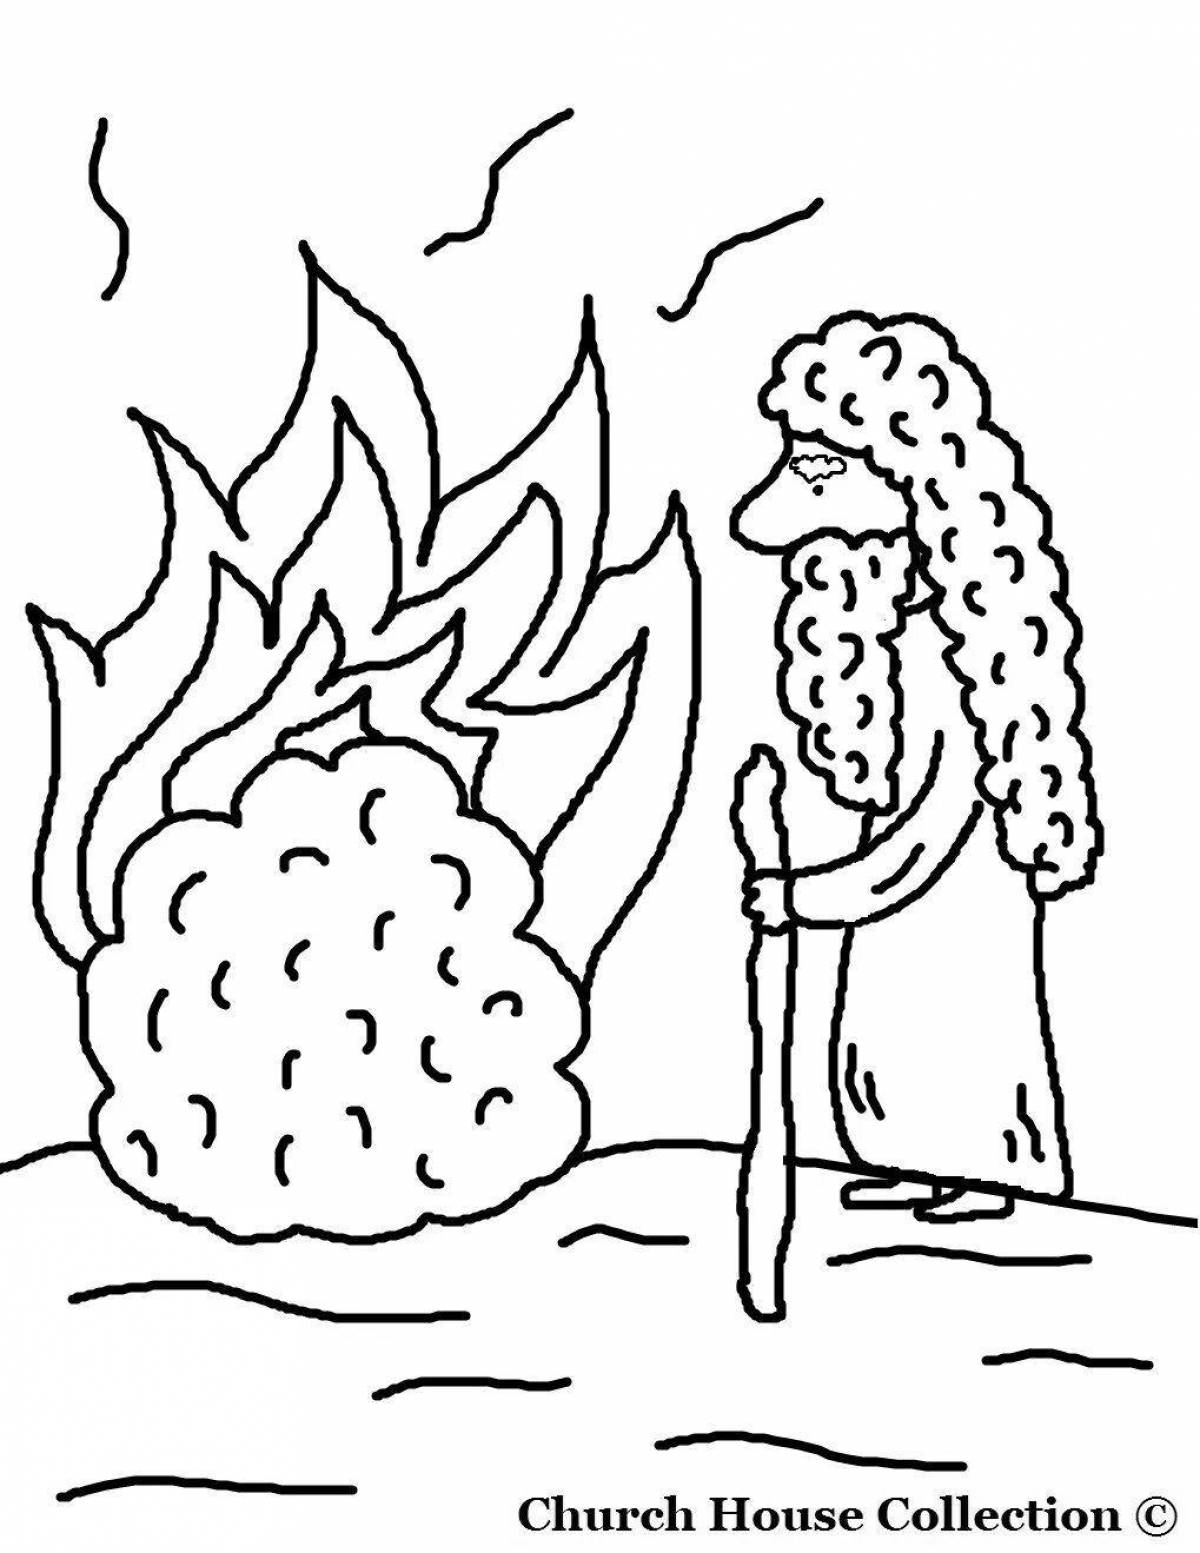 Attractive drawing of a burning bush